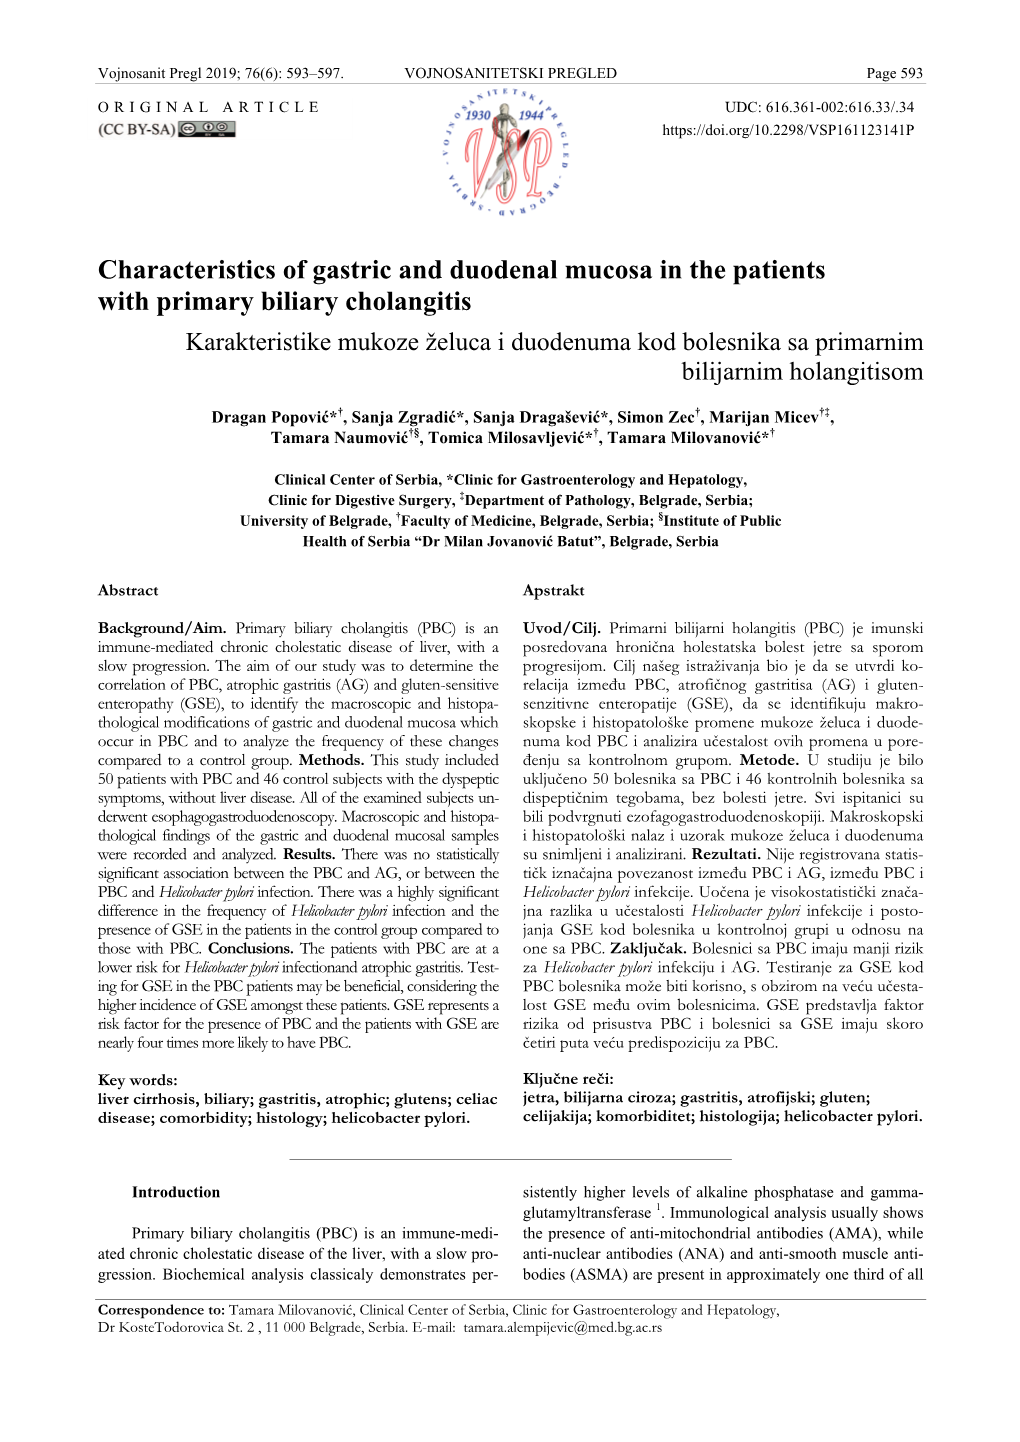 Characteristics of Gastric and Duodenal Mucosa in the Patients